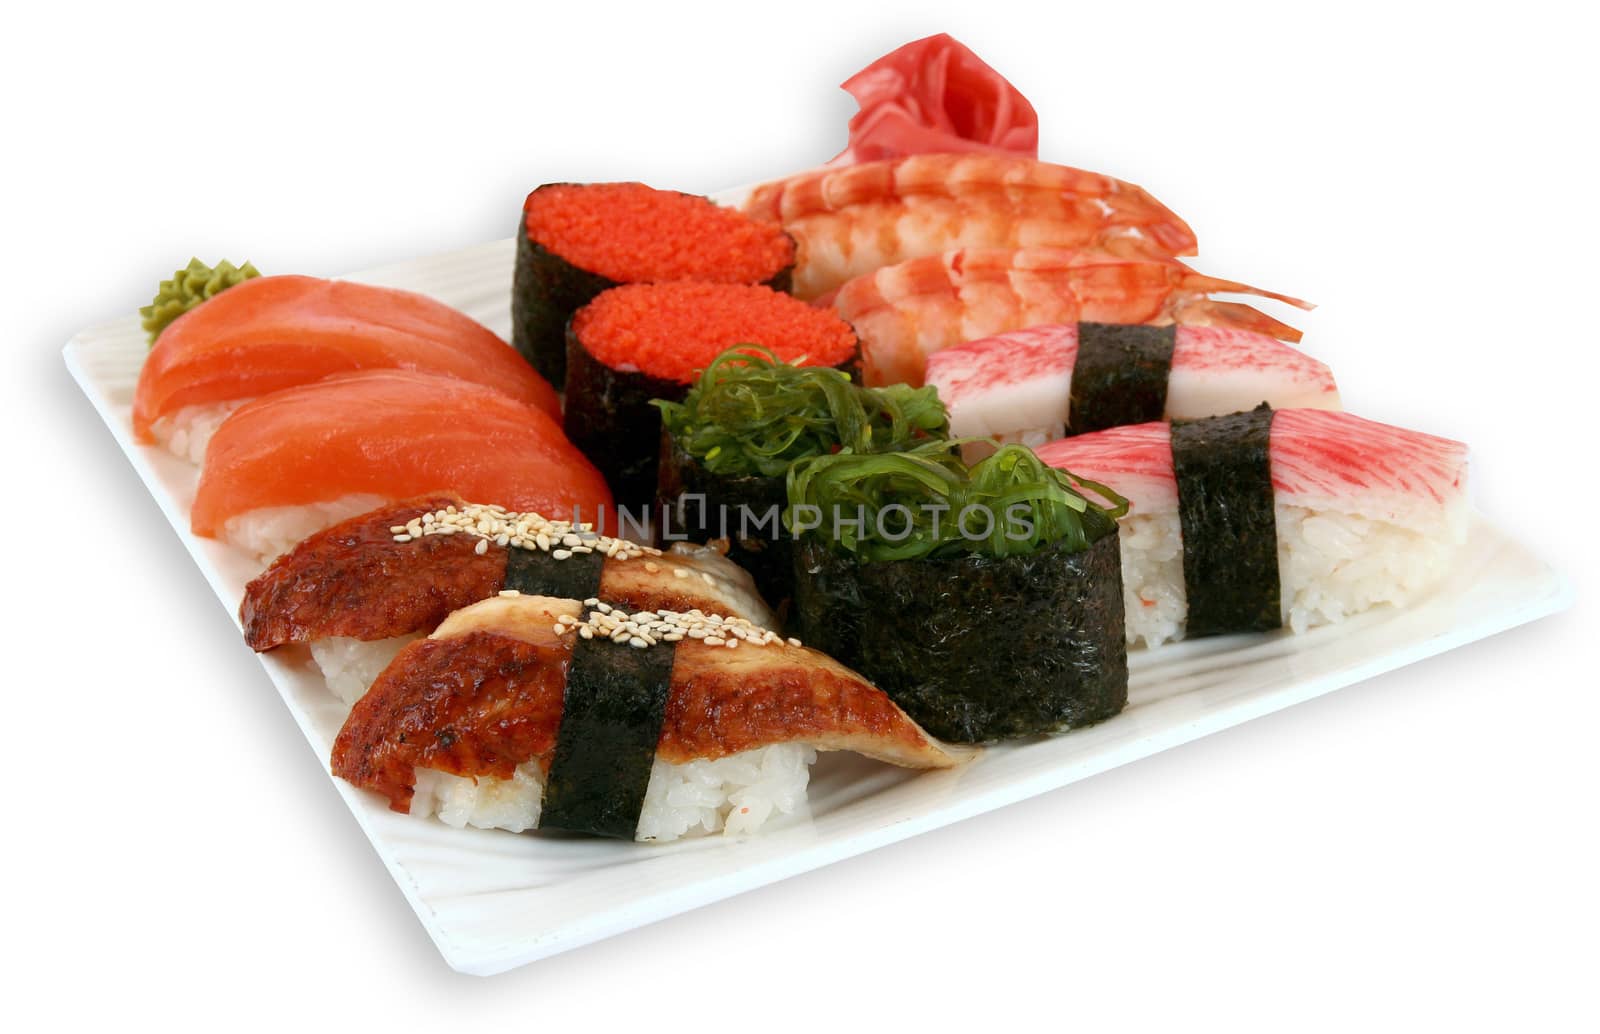 japaneese cuisine meal sushi by fotosergio